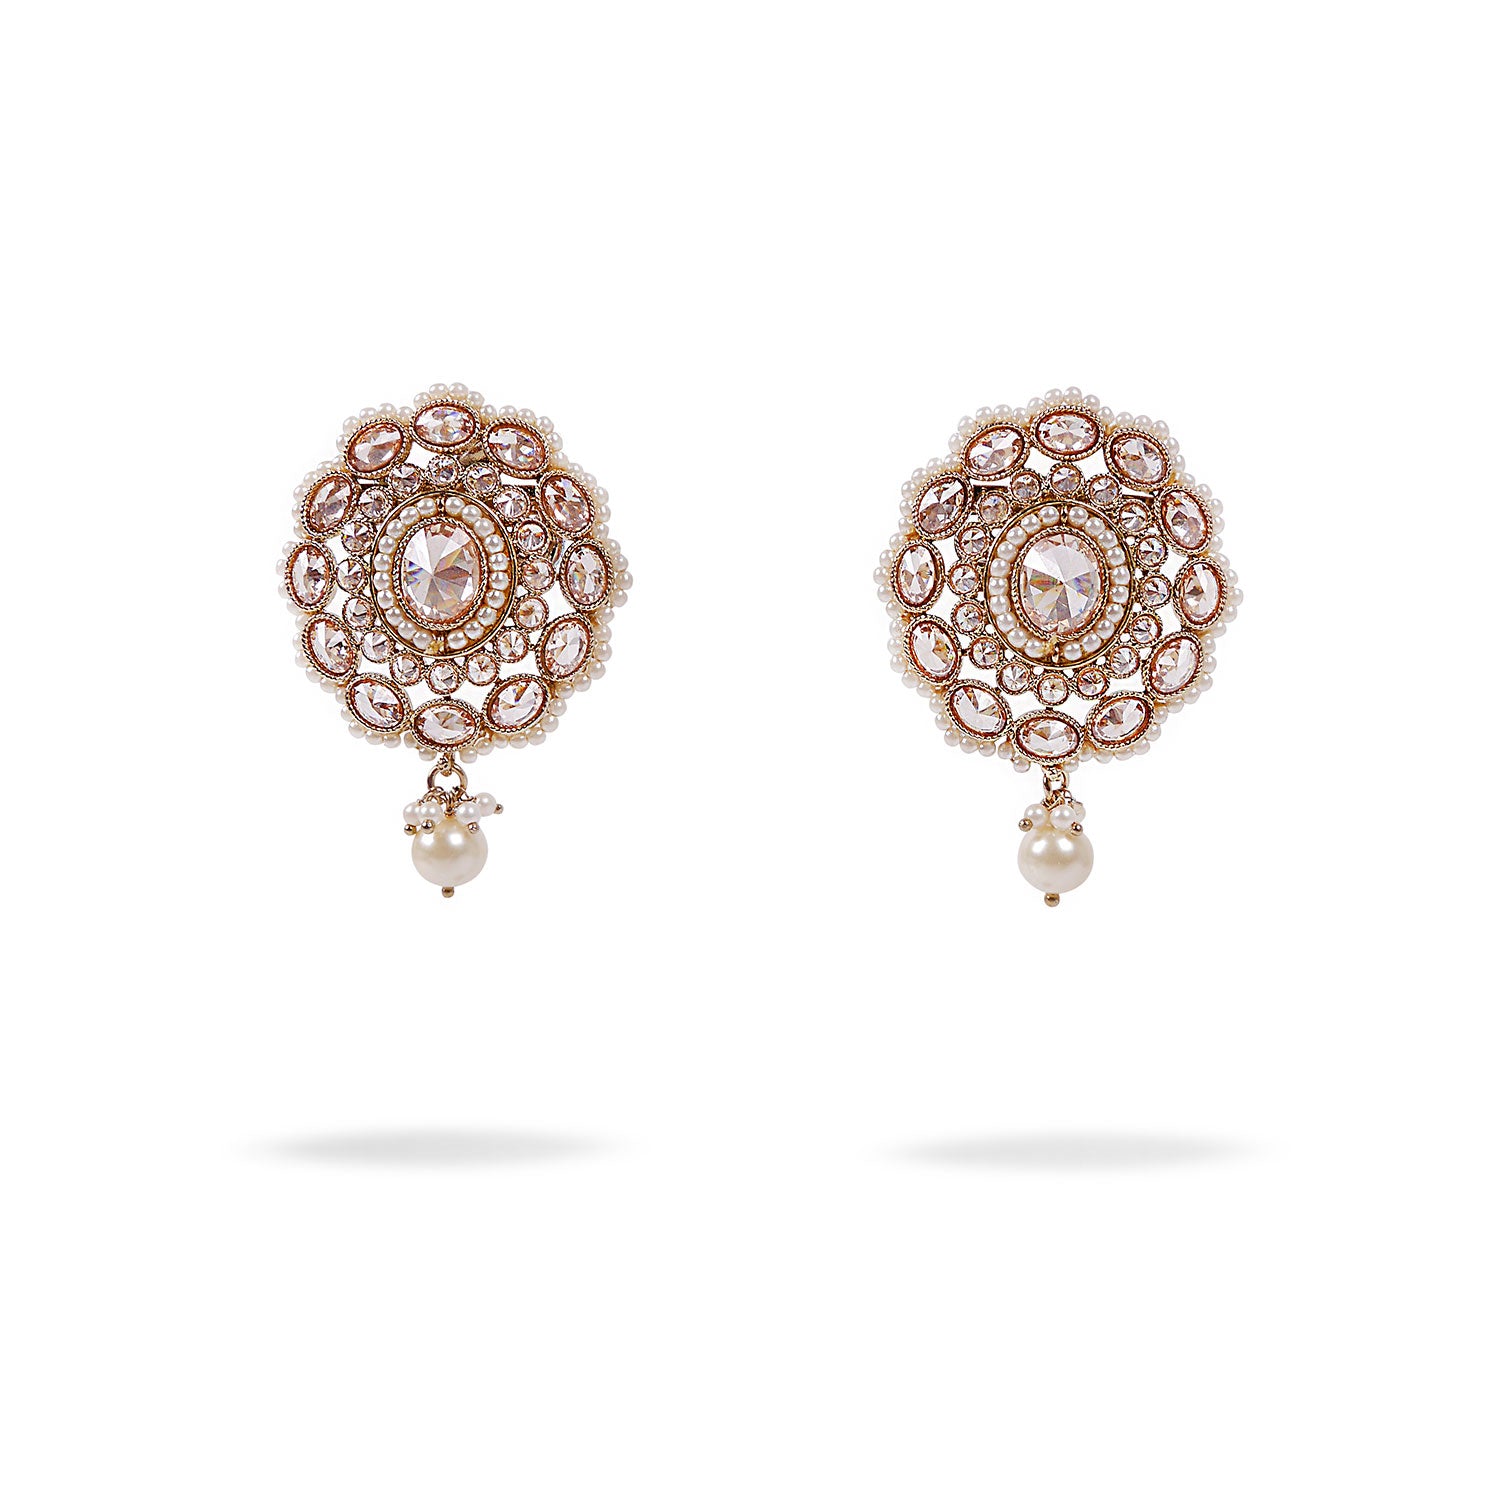 Rosa Earrings in Pearl and Antique Gold